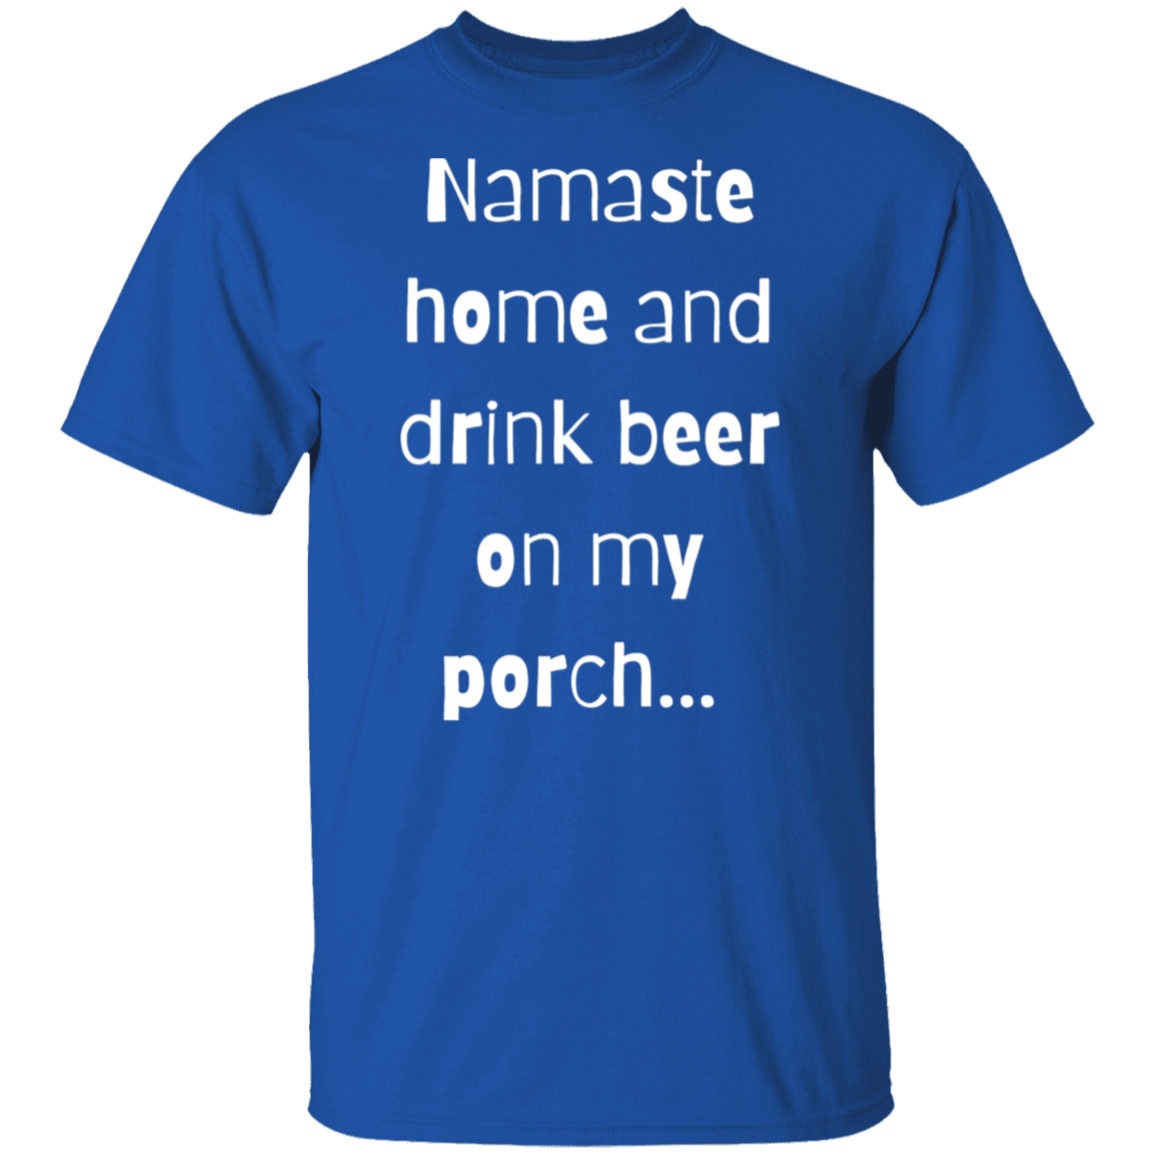 Namaste home and drink beer on my porch T-Shirt